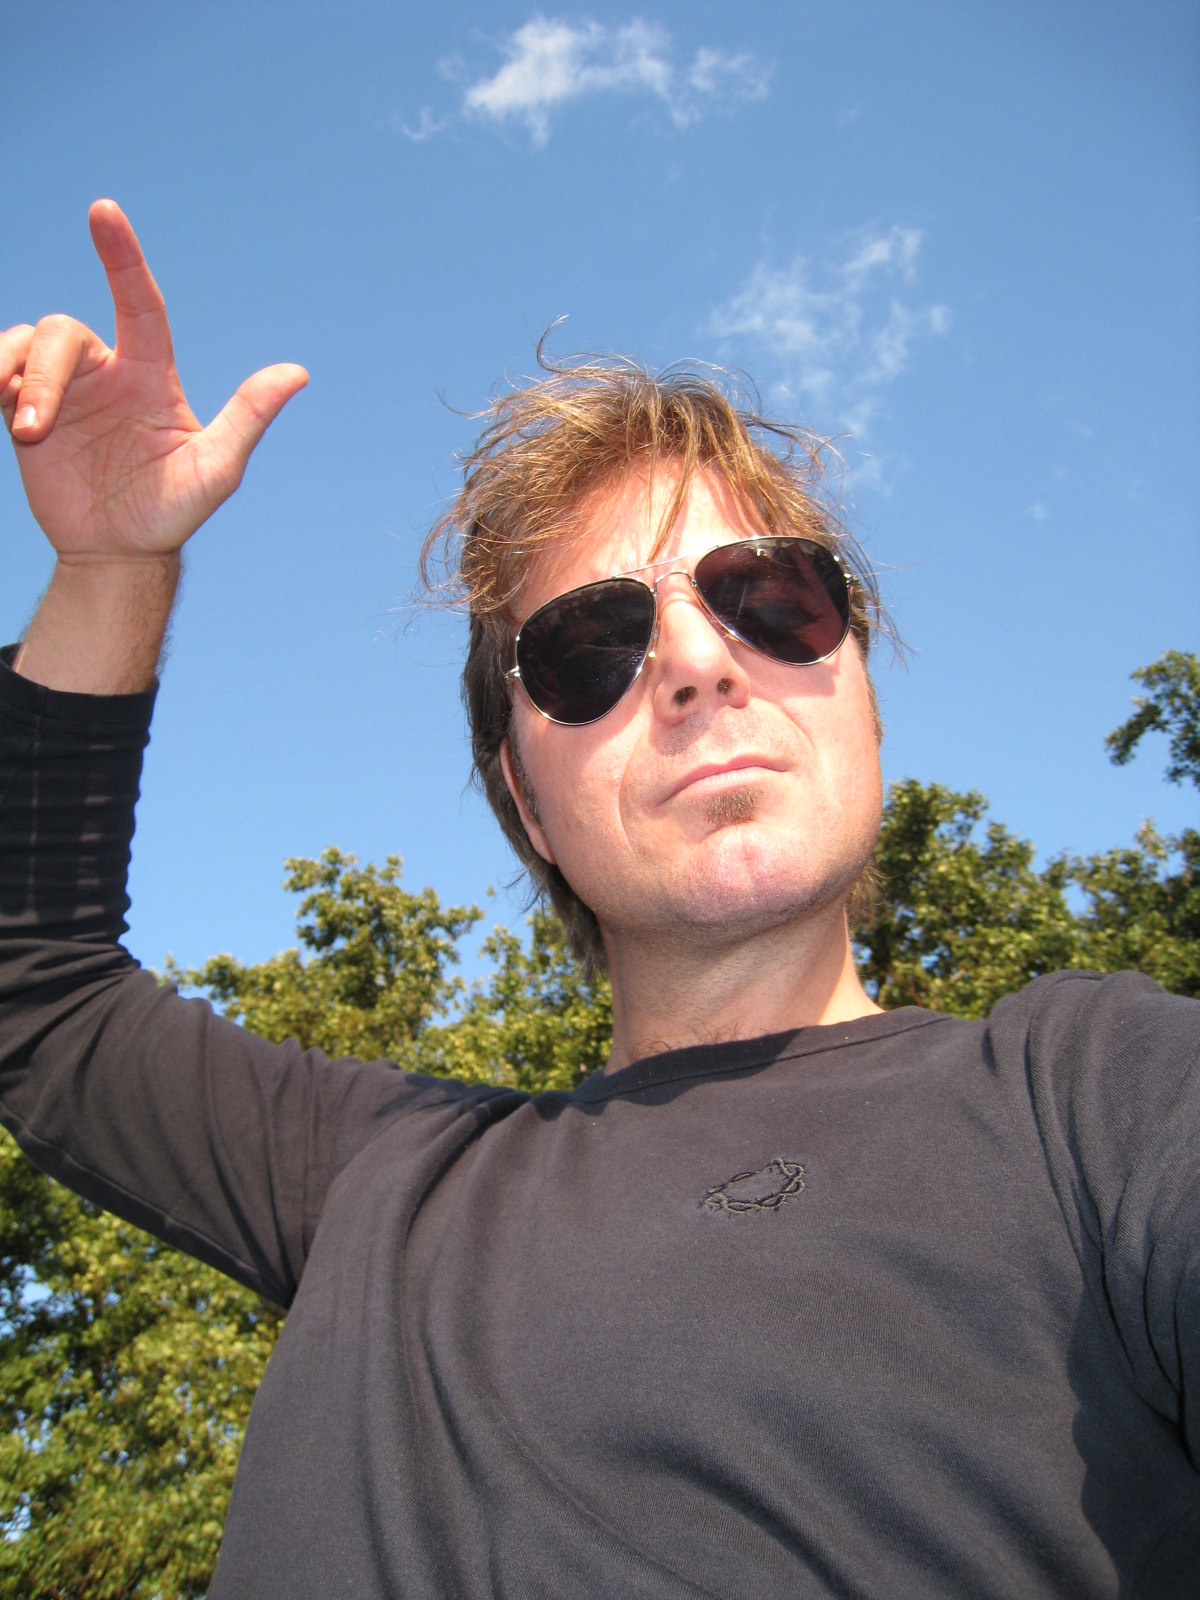 a man wearing sunglasses and a black shirt posing with the peace sign